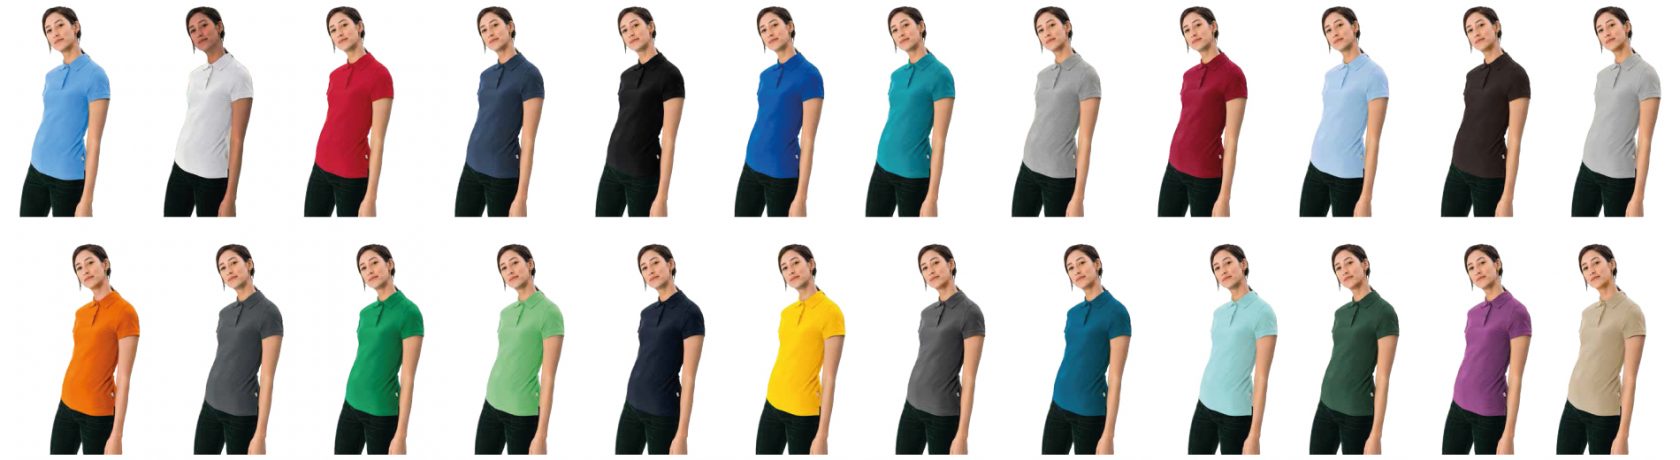 Polos - Bekleidung Housekeeping – Hoteluniform – Hotelbekleidung –Dienstkleidung – Berufsbekleidung – Corporate Fashion – acp collection GmbH – Muenchen